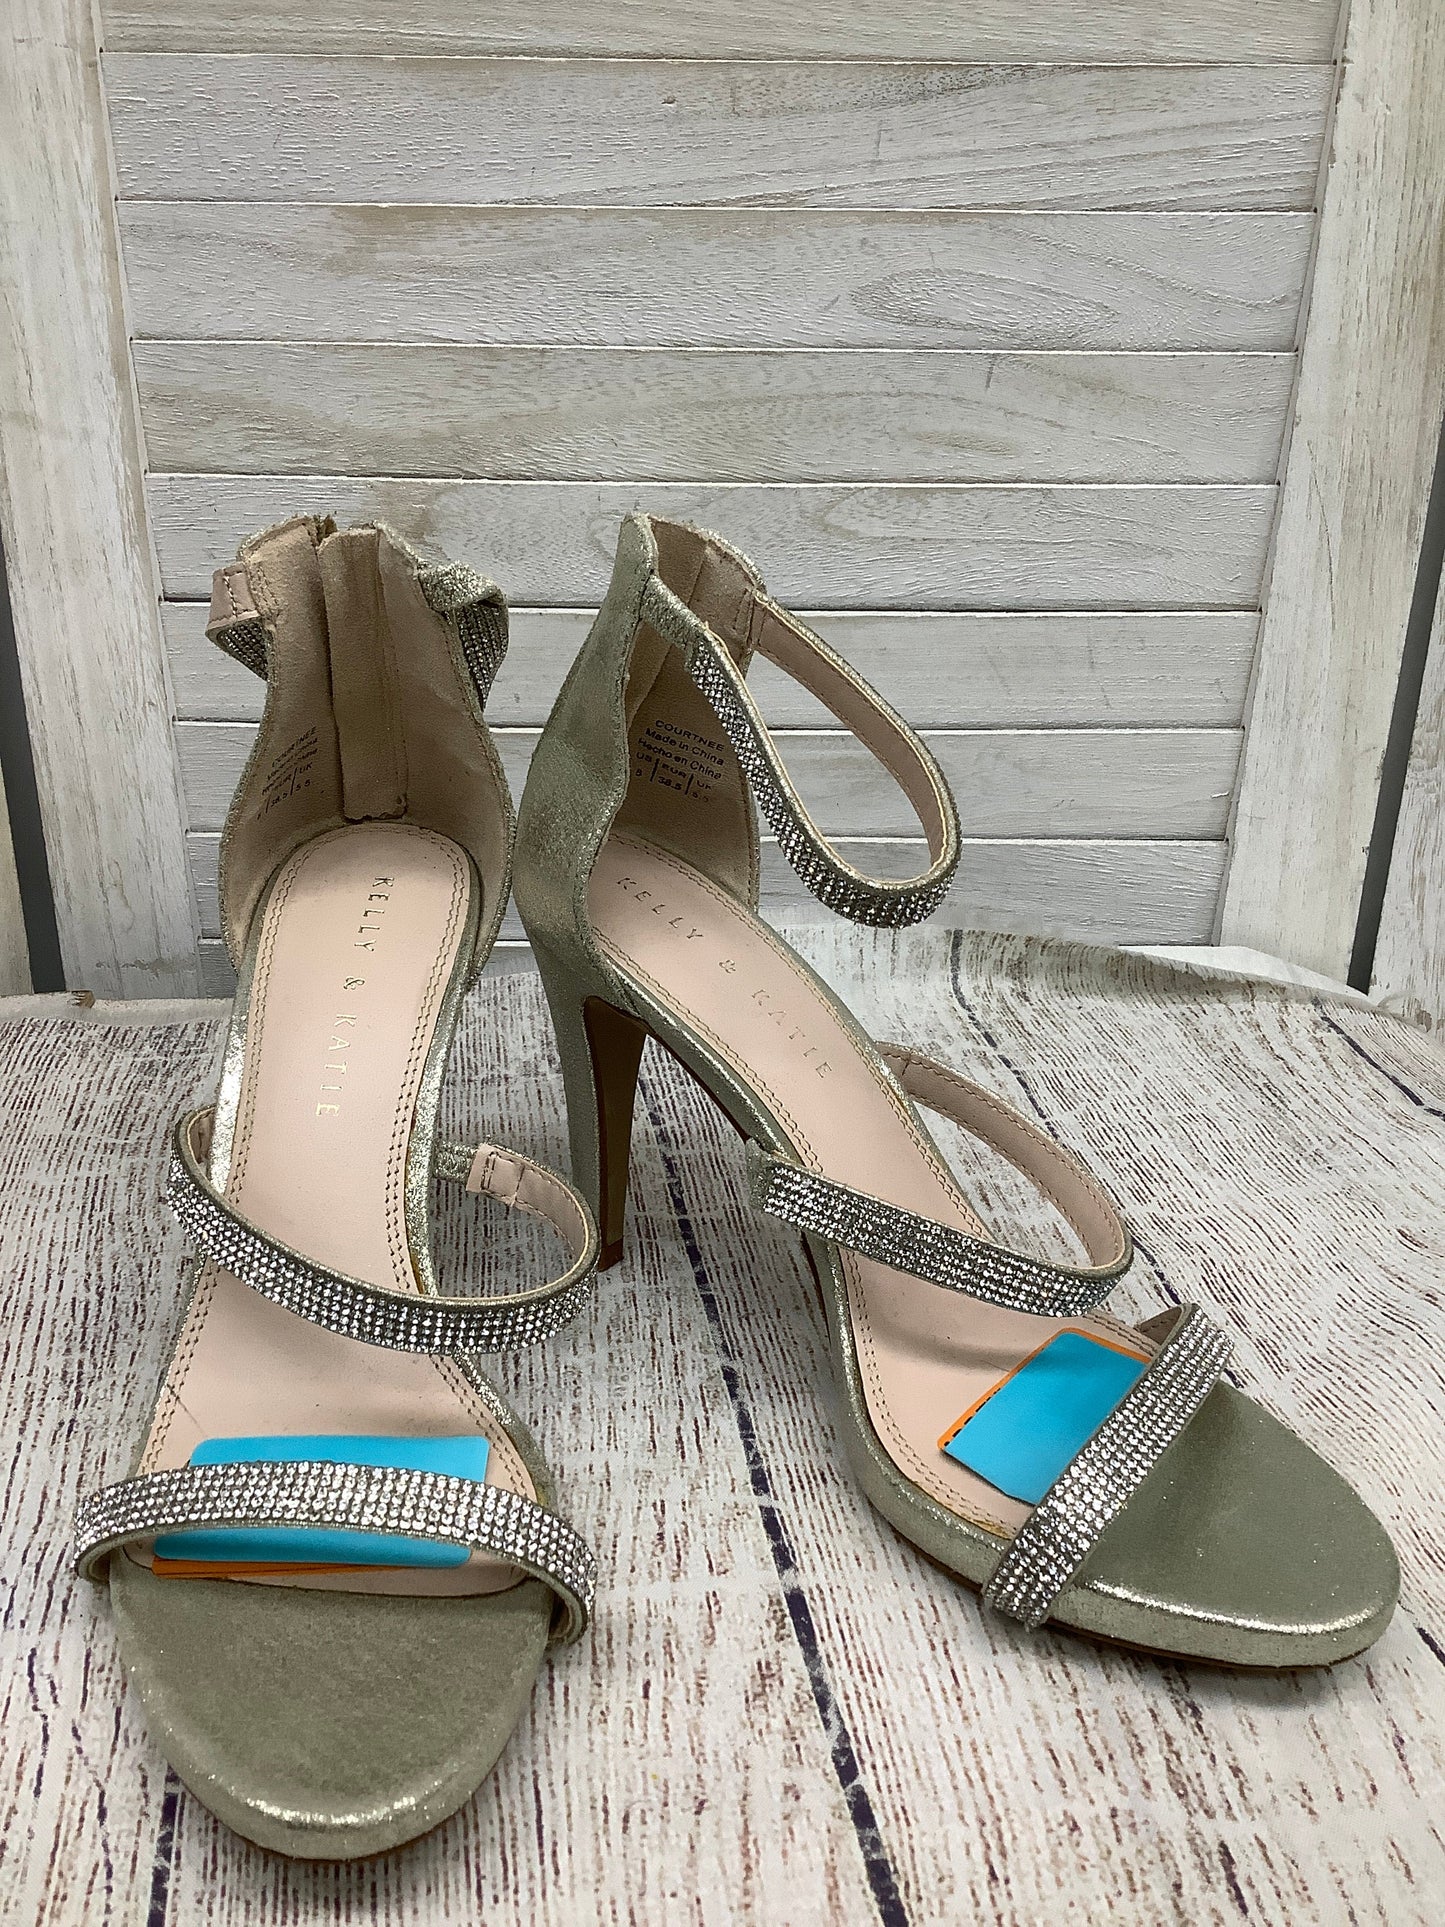 Sandals Heels Stiletto By Kelly And Katie  Size: 8